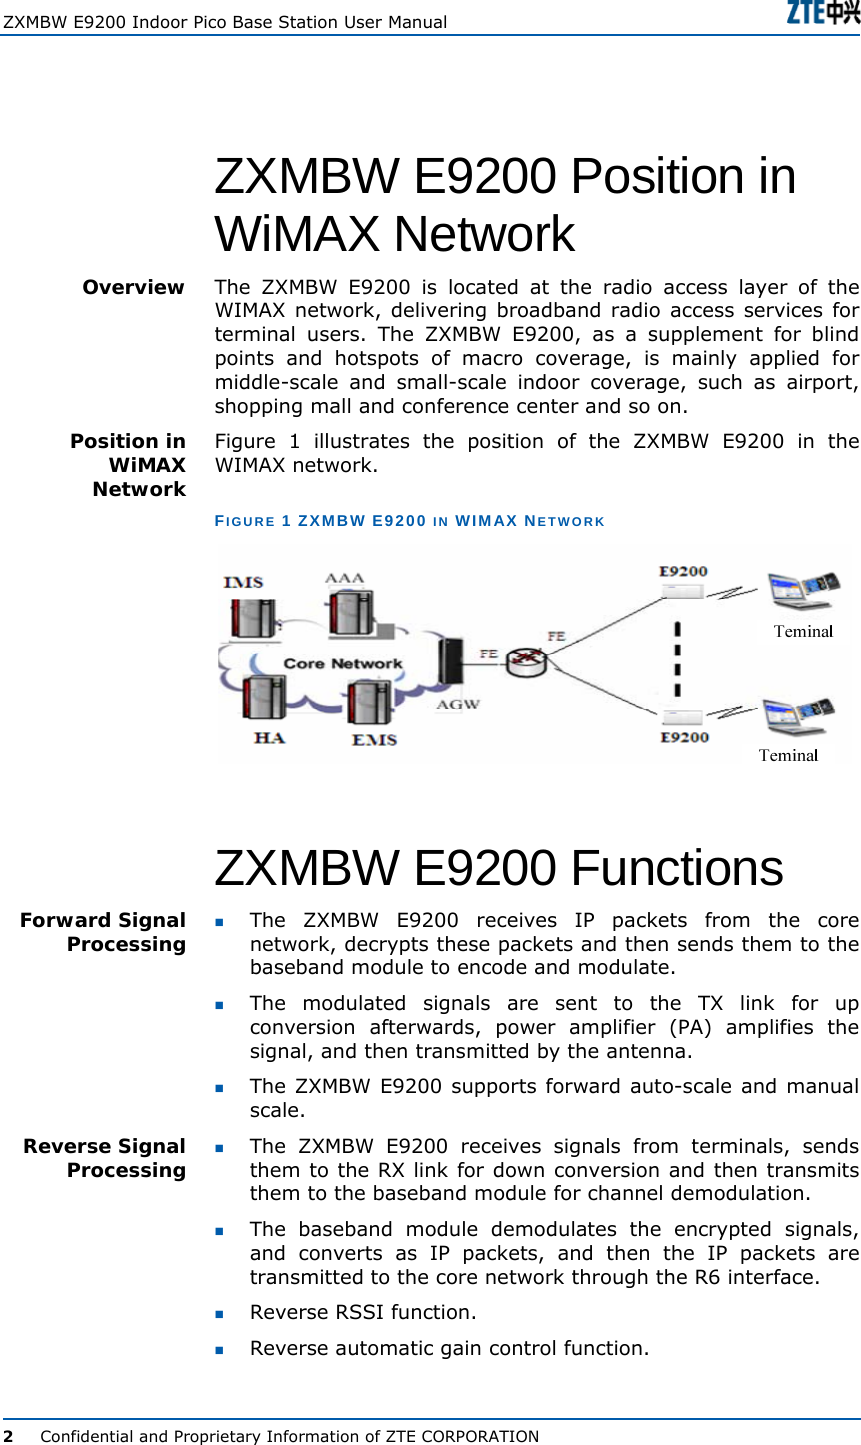  ZXMBW E9200 Indoor Pico Base Station User Manual   2      Confidential and Proprietary Information of ZTE CORPORATION  ZXMBW E9200 Position in WiMAX Network The ZXMBW E9200 is located at the radio access layer of the WIMAX network, delivering broadband radio access services for terminal users. The ZXMBW E9200, as a supplement for blind points and hotspots of macro coverage, is mainly applied for middle-scale and small-scale indoor coverage, such as airport, shopping mall and conference center and so on.  Figure 1 illustrates the position of the ZXMBW E9200 in the WIMAX network. FIGURE 1 ZXMBW E9200 IN WIMAX NETWORK  ZXMBW E9200 Functions  The ZXMBW E9200 receives IP packets from the core network, decrypts these packets and then sends them to the baseband module to encode and modulate.  The modulated signals are sent to the TX link for up conversion afterwards, power amplifier (PA) amplifies the signal, and then transmitted by the antenna.    The ZXMBW E9200 supports forward auto-scale and manual scale.  The ZXMBW E9200 receives signals from terminals, sends them to the RX link for down conversion and then transmits them to the baseband module for channel demodulation.  The baseband module demodulates the encrypted signals, and converts as IP packets, and then the IP packets are transmitted to the core network through the R6 interface.  Reverse RSSI function.  Reverse automatic gain control function. Overview Position in WiMAX Network Forward Signal Processing Reverse Signal Processing 